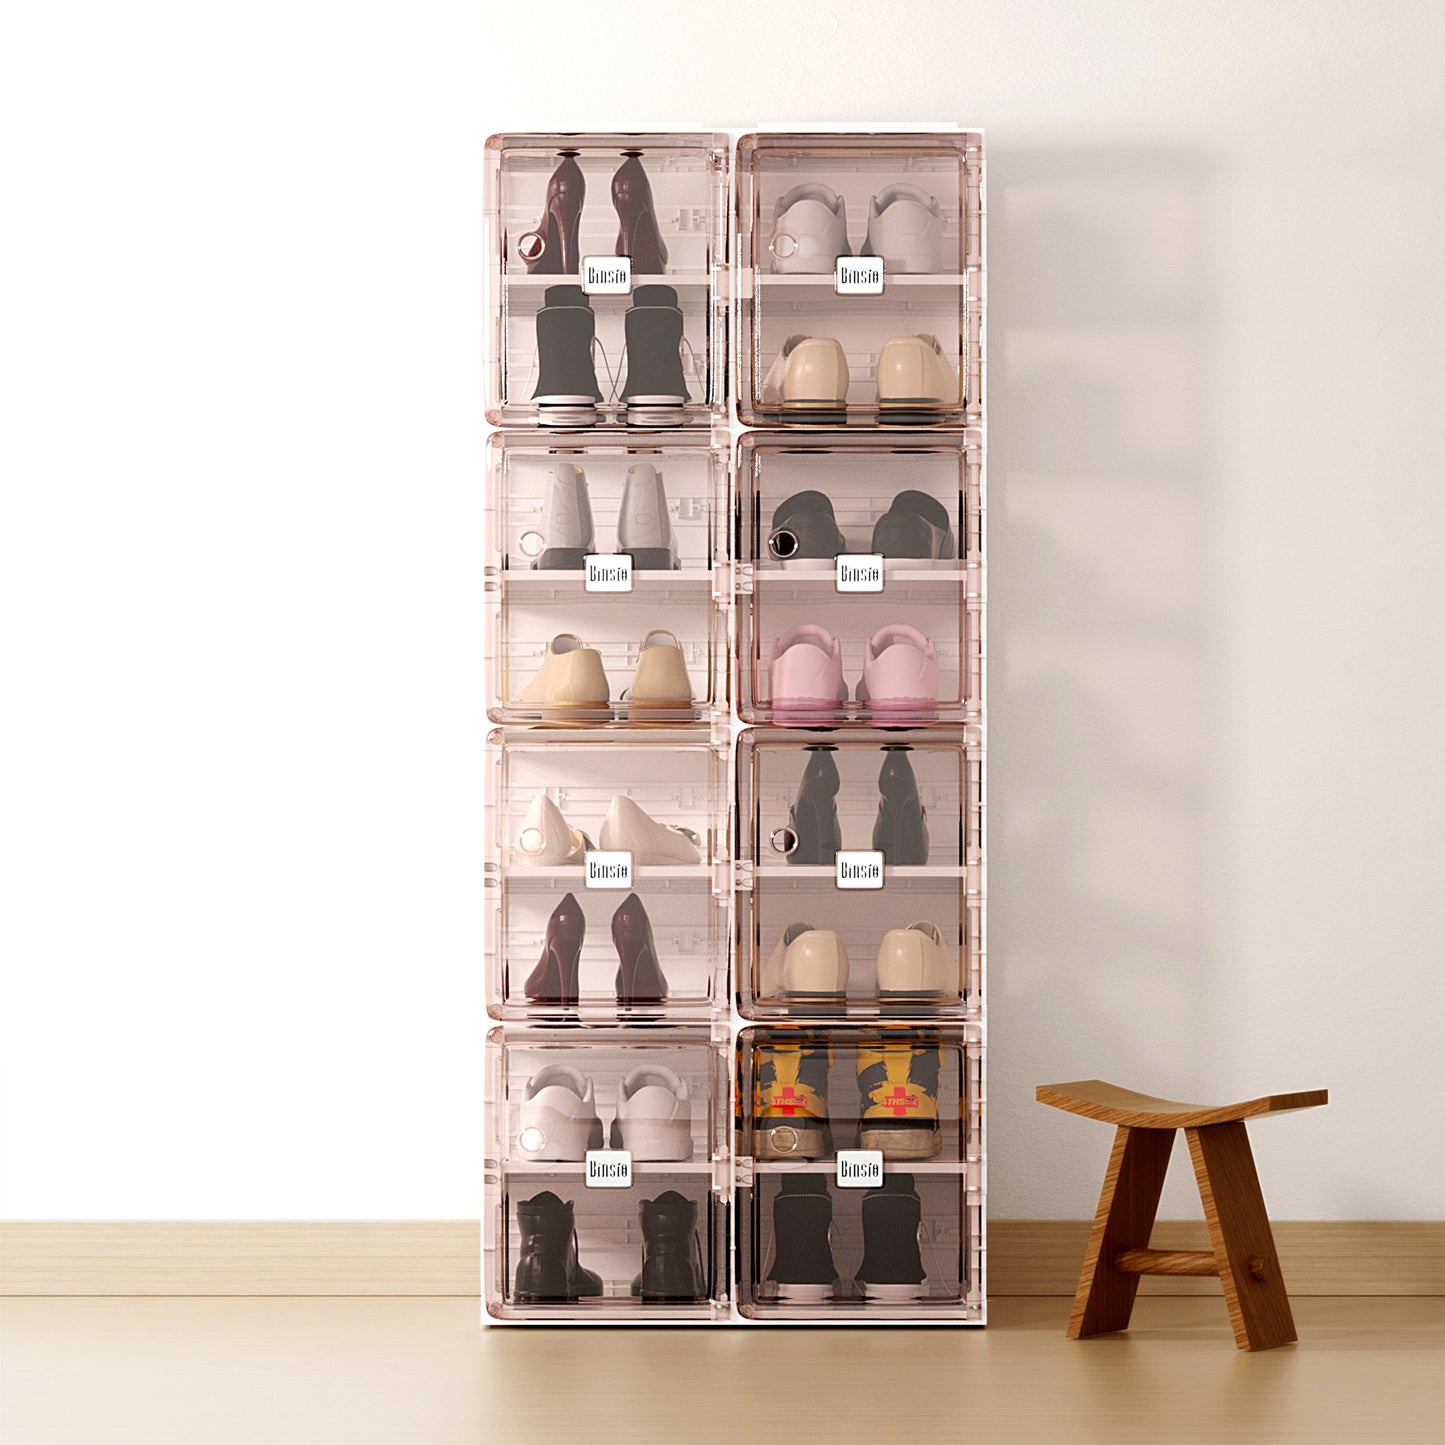 BINSIO Storage Organizer, Shoe Organizer for Closet / Entry Way, Foldable Shoe Rack Organizer with Visible Door, Fast Easy Assemble Shoe Boxes Cabinet, Reusable Slipper Holders, Durable Plastic Shoe Storage with Bronze Panel-8 Tiers